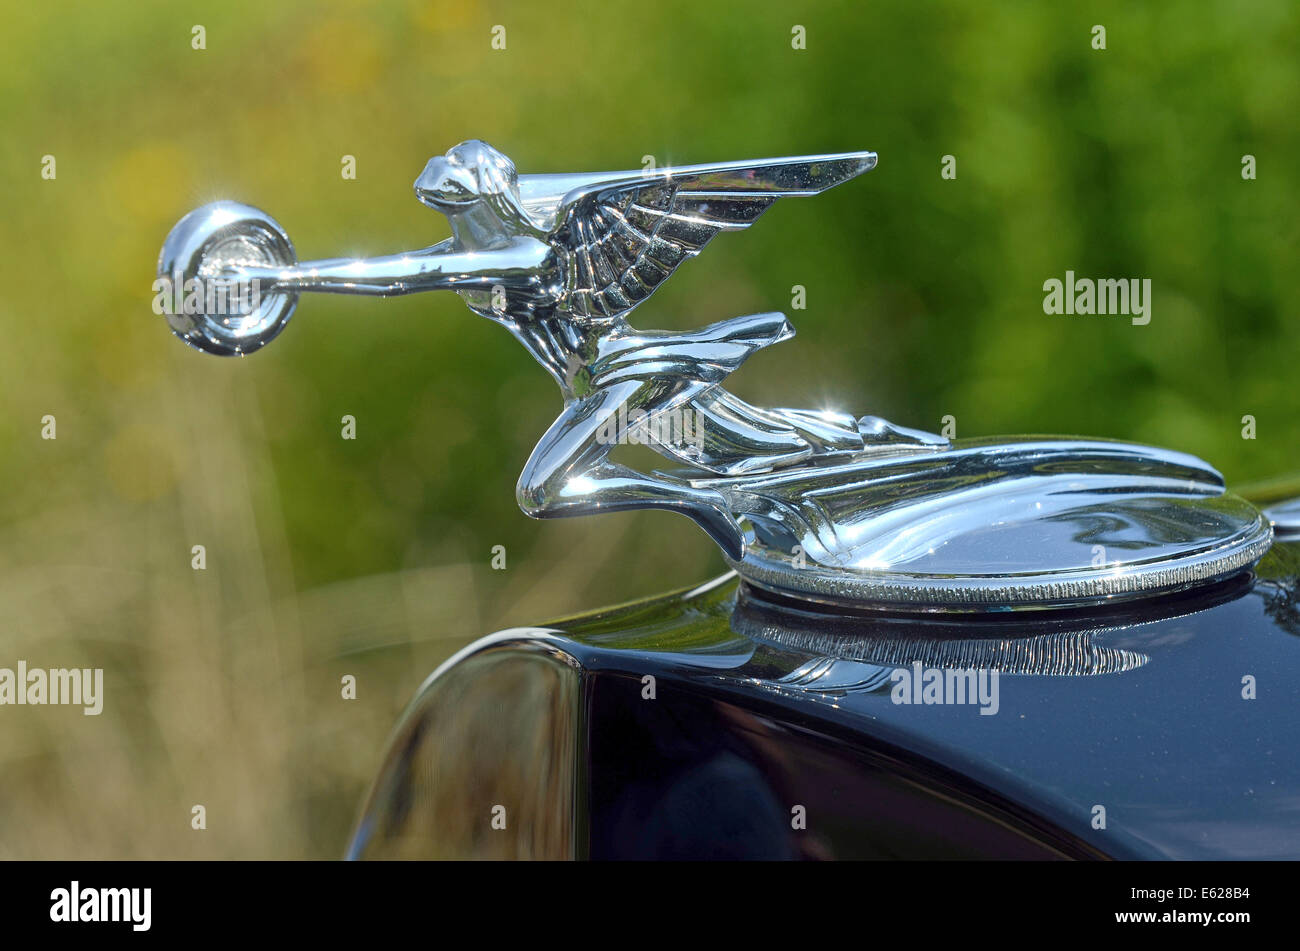 Juechen, Germany. 2nd Aug, 2014. A Packard hood ornament is on display on the bonnet of a Packard 'Super Eight 1004 Victoria Convertible' car model built in 1933 during the 'Classic Days' vintage car show at Dyck palace in Juechen, Germany, 2 August 2014. Photo: Horst Ossinger/dpa - NO WIRE SERVICE -/dpa/Alamy Live News Stock Photo